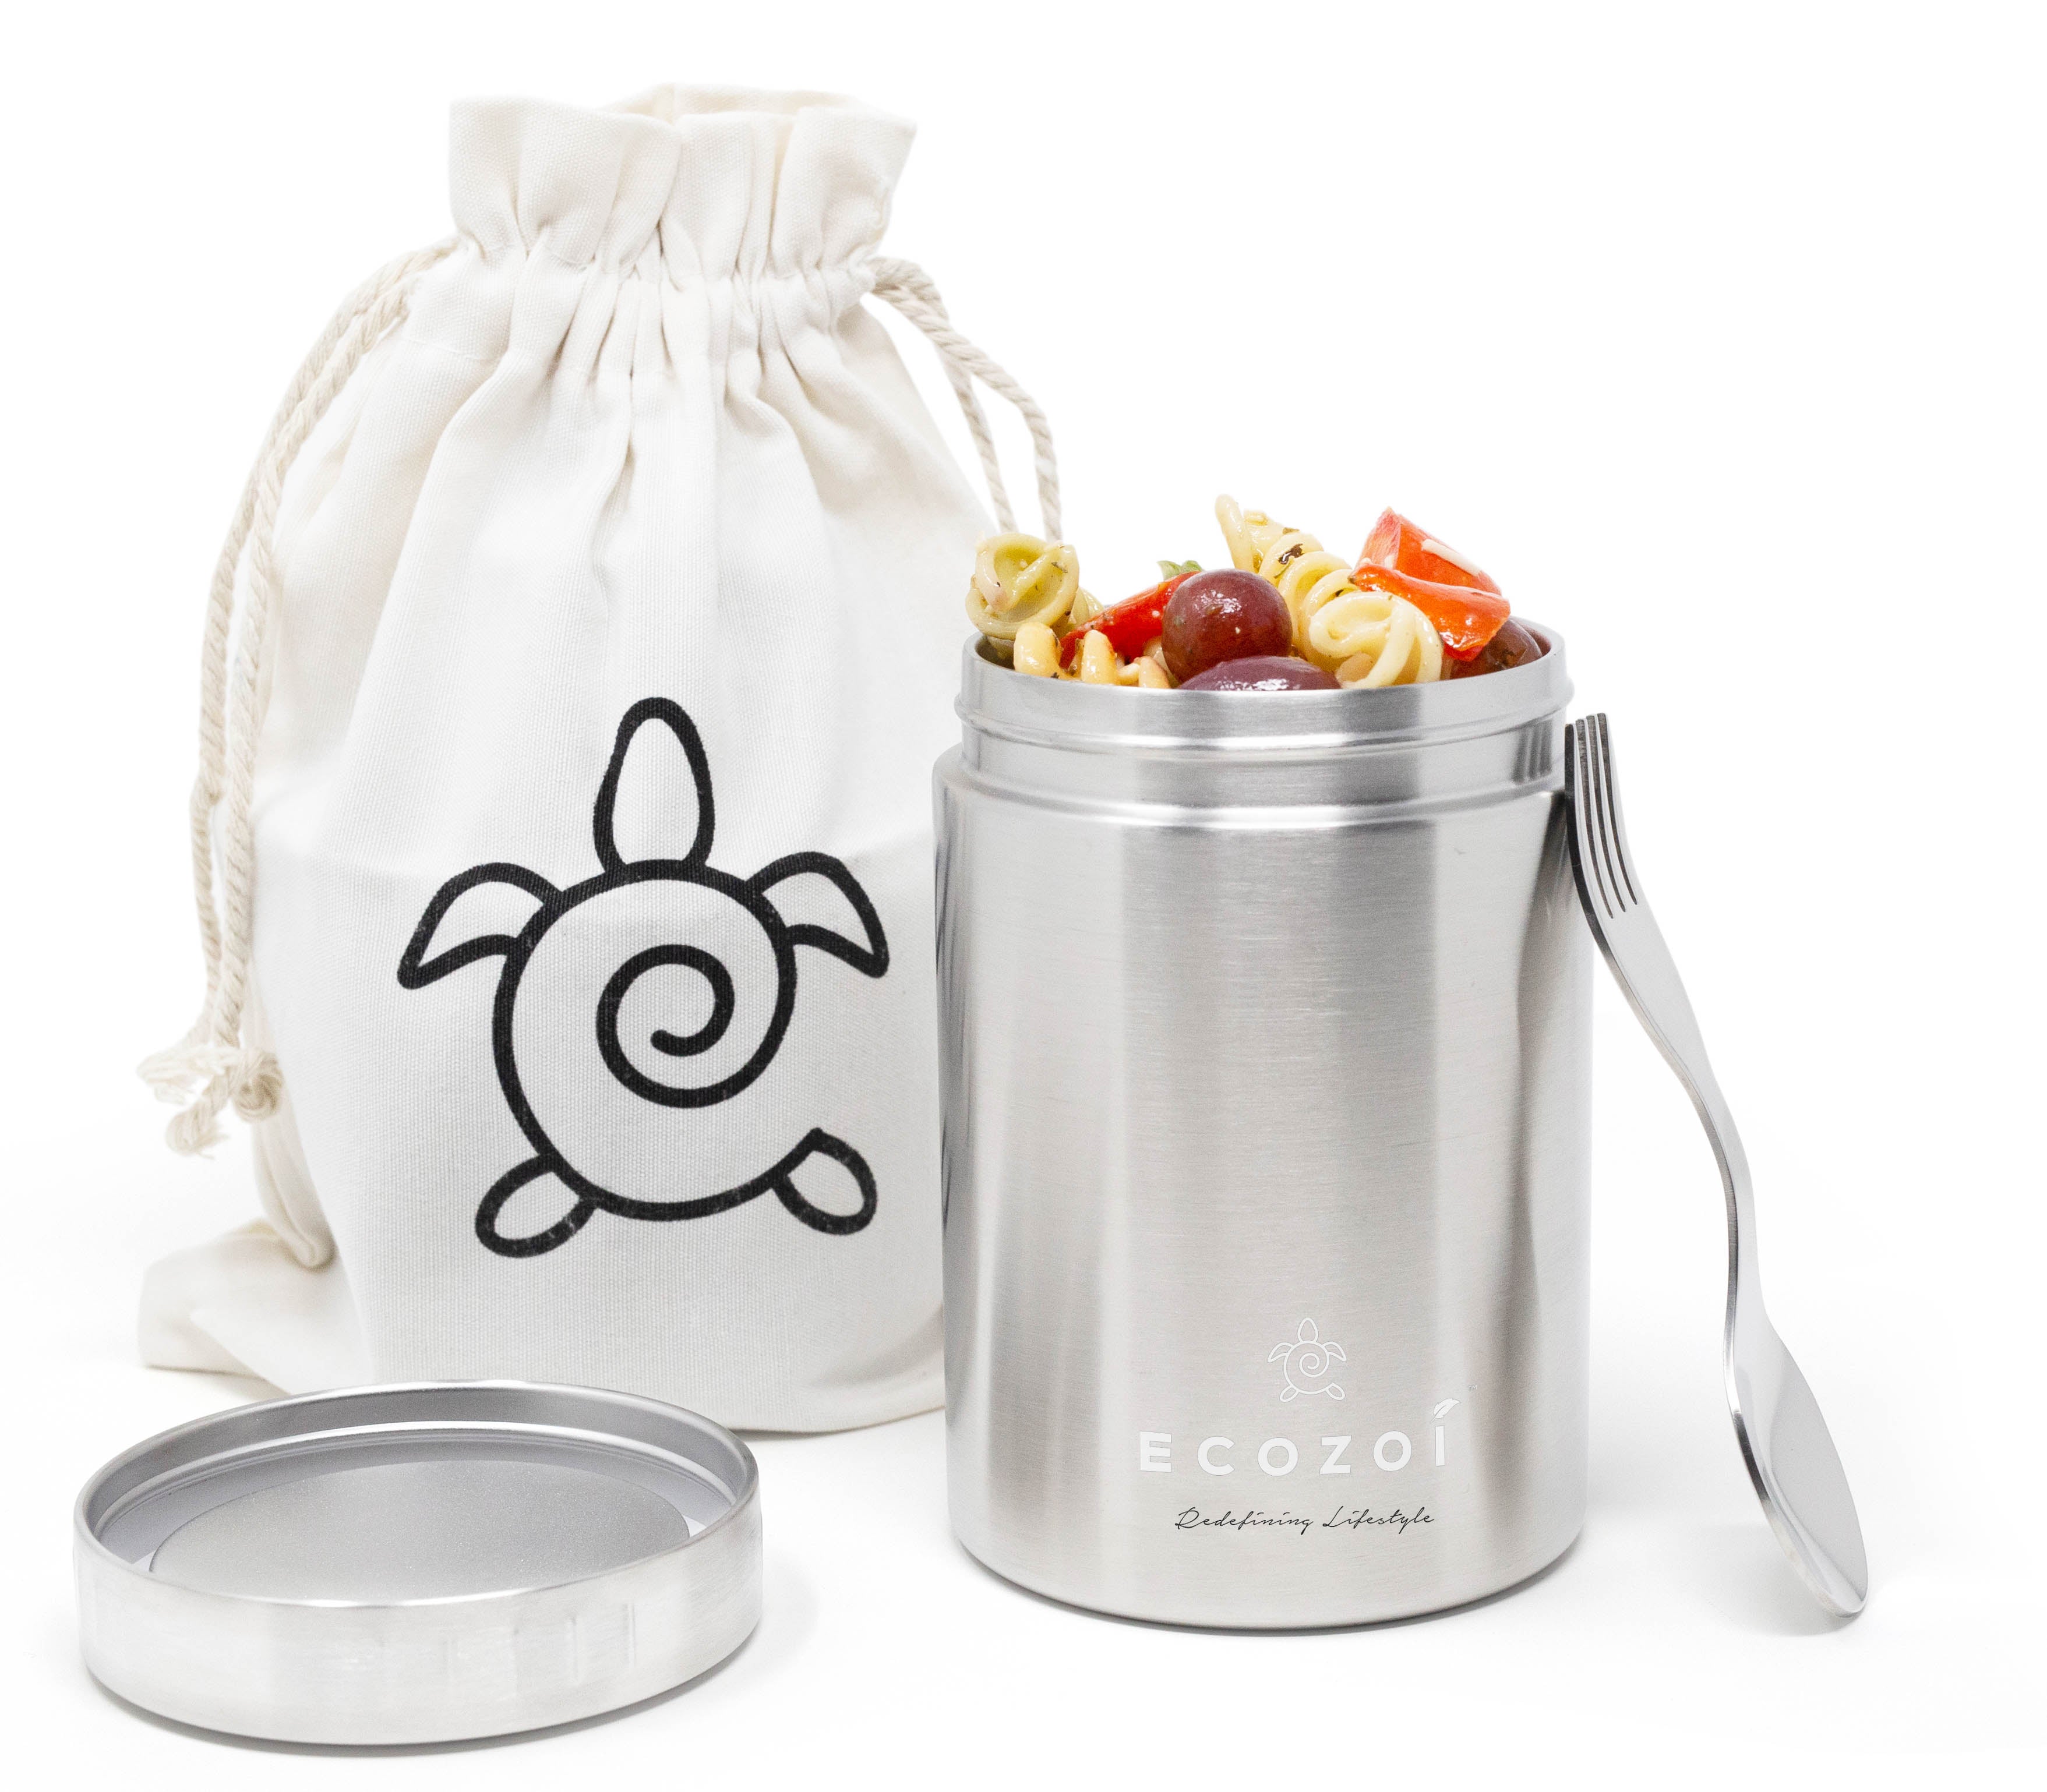 Ecozoi Vacuum Insulated Stainless Steel Food Jar - 17 oz with